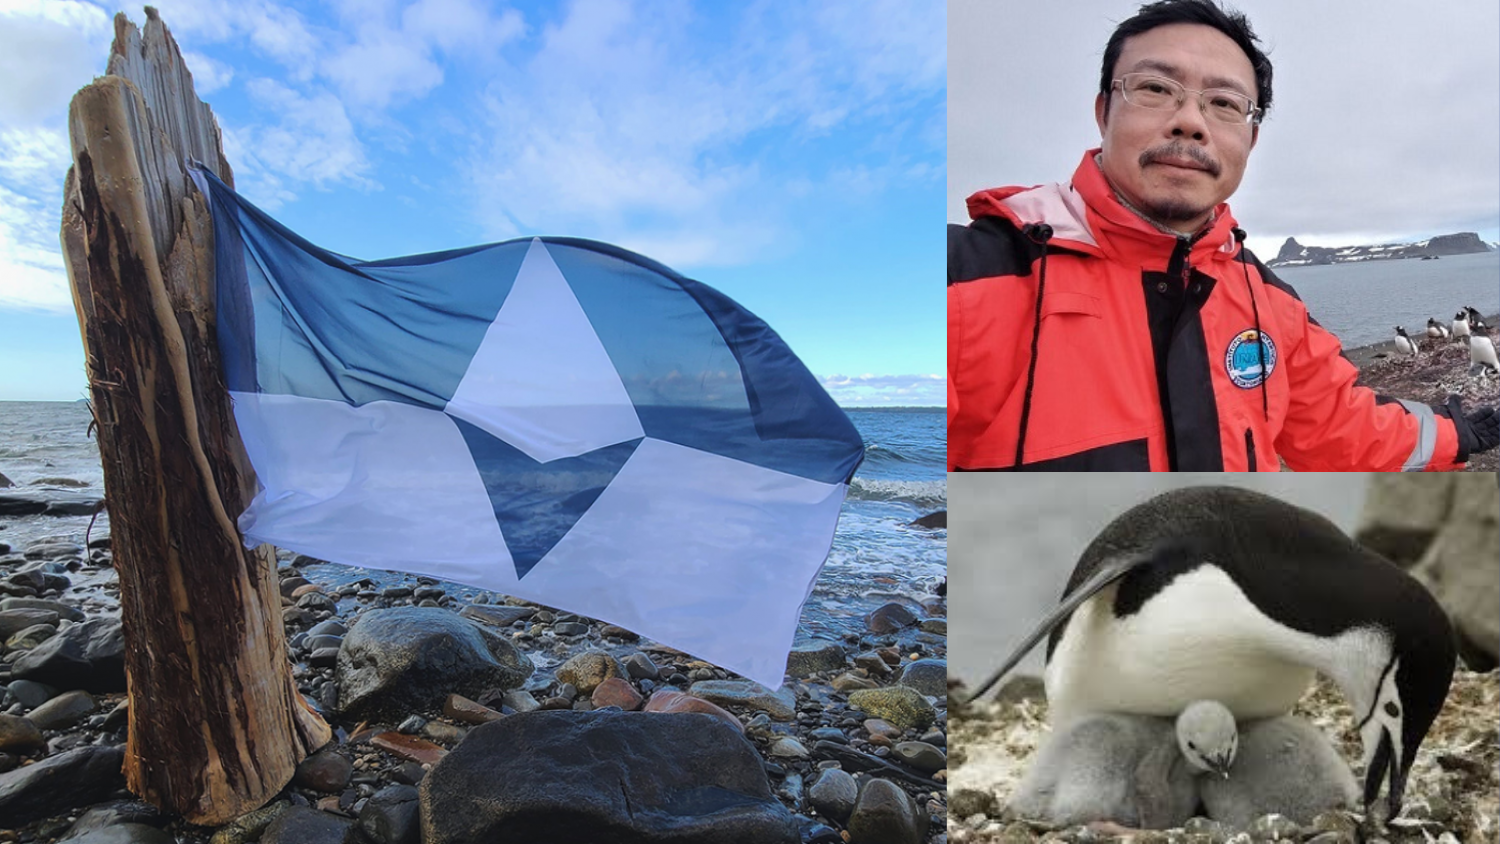 South Antarctica Flag, Yu-Fai Leung, and penguins - Antarctica Day Recognizes the Anniversary of the Signing of the Antarctic Treaty - Parks Recreation and Tourism Management NC State University